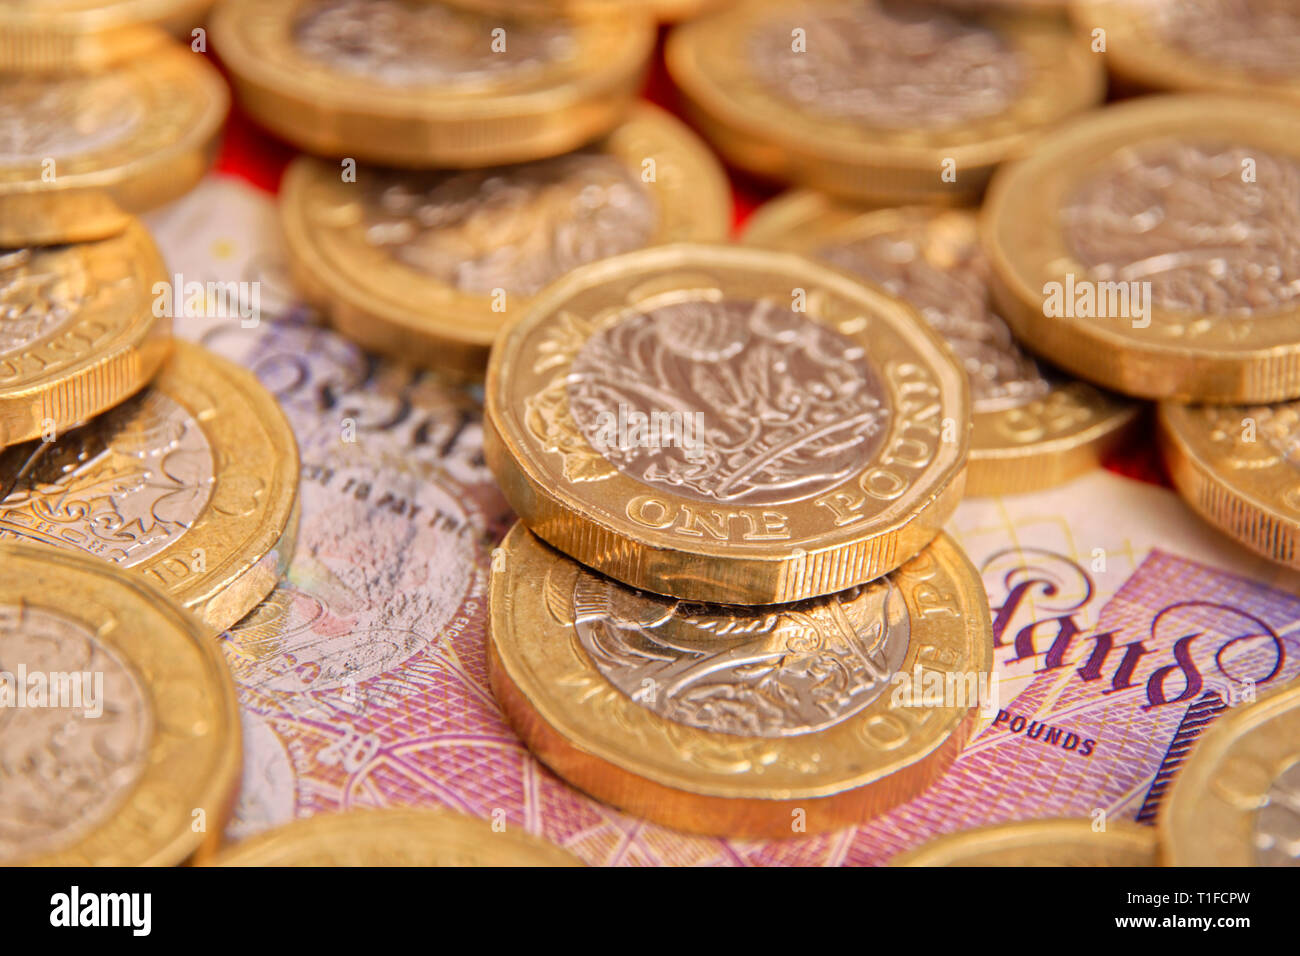 UK Pound Sterling coins. Stock Photo